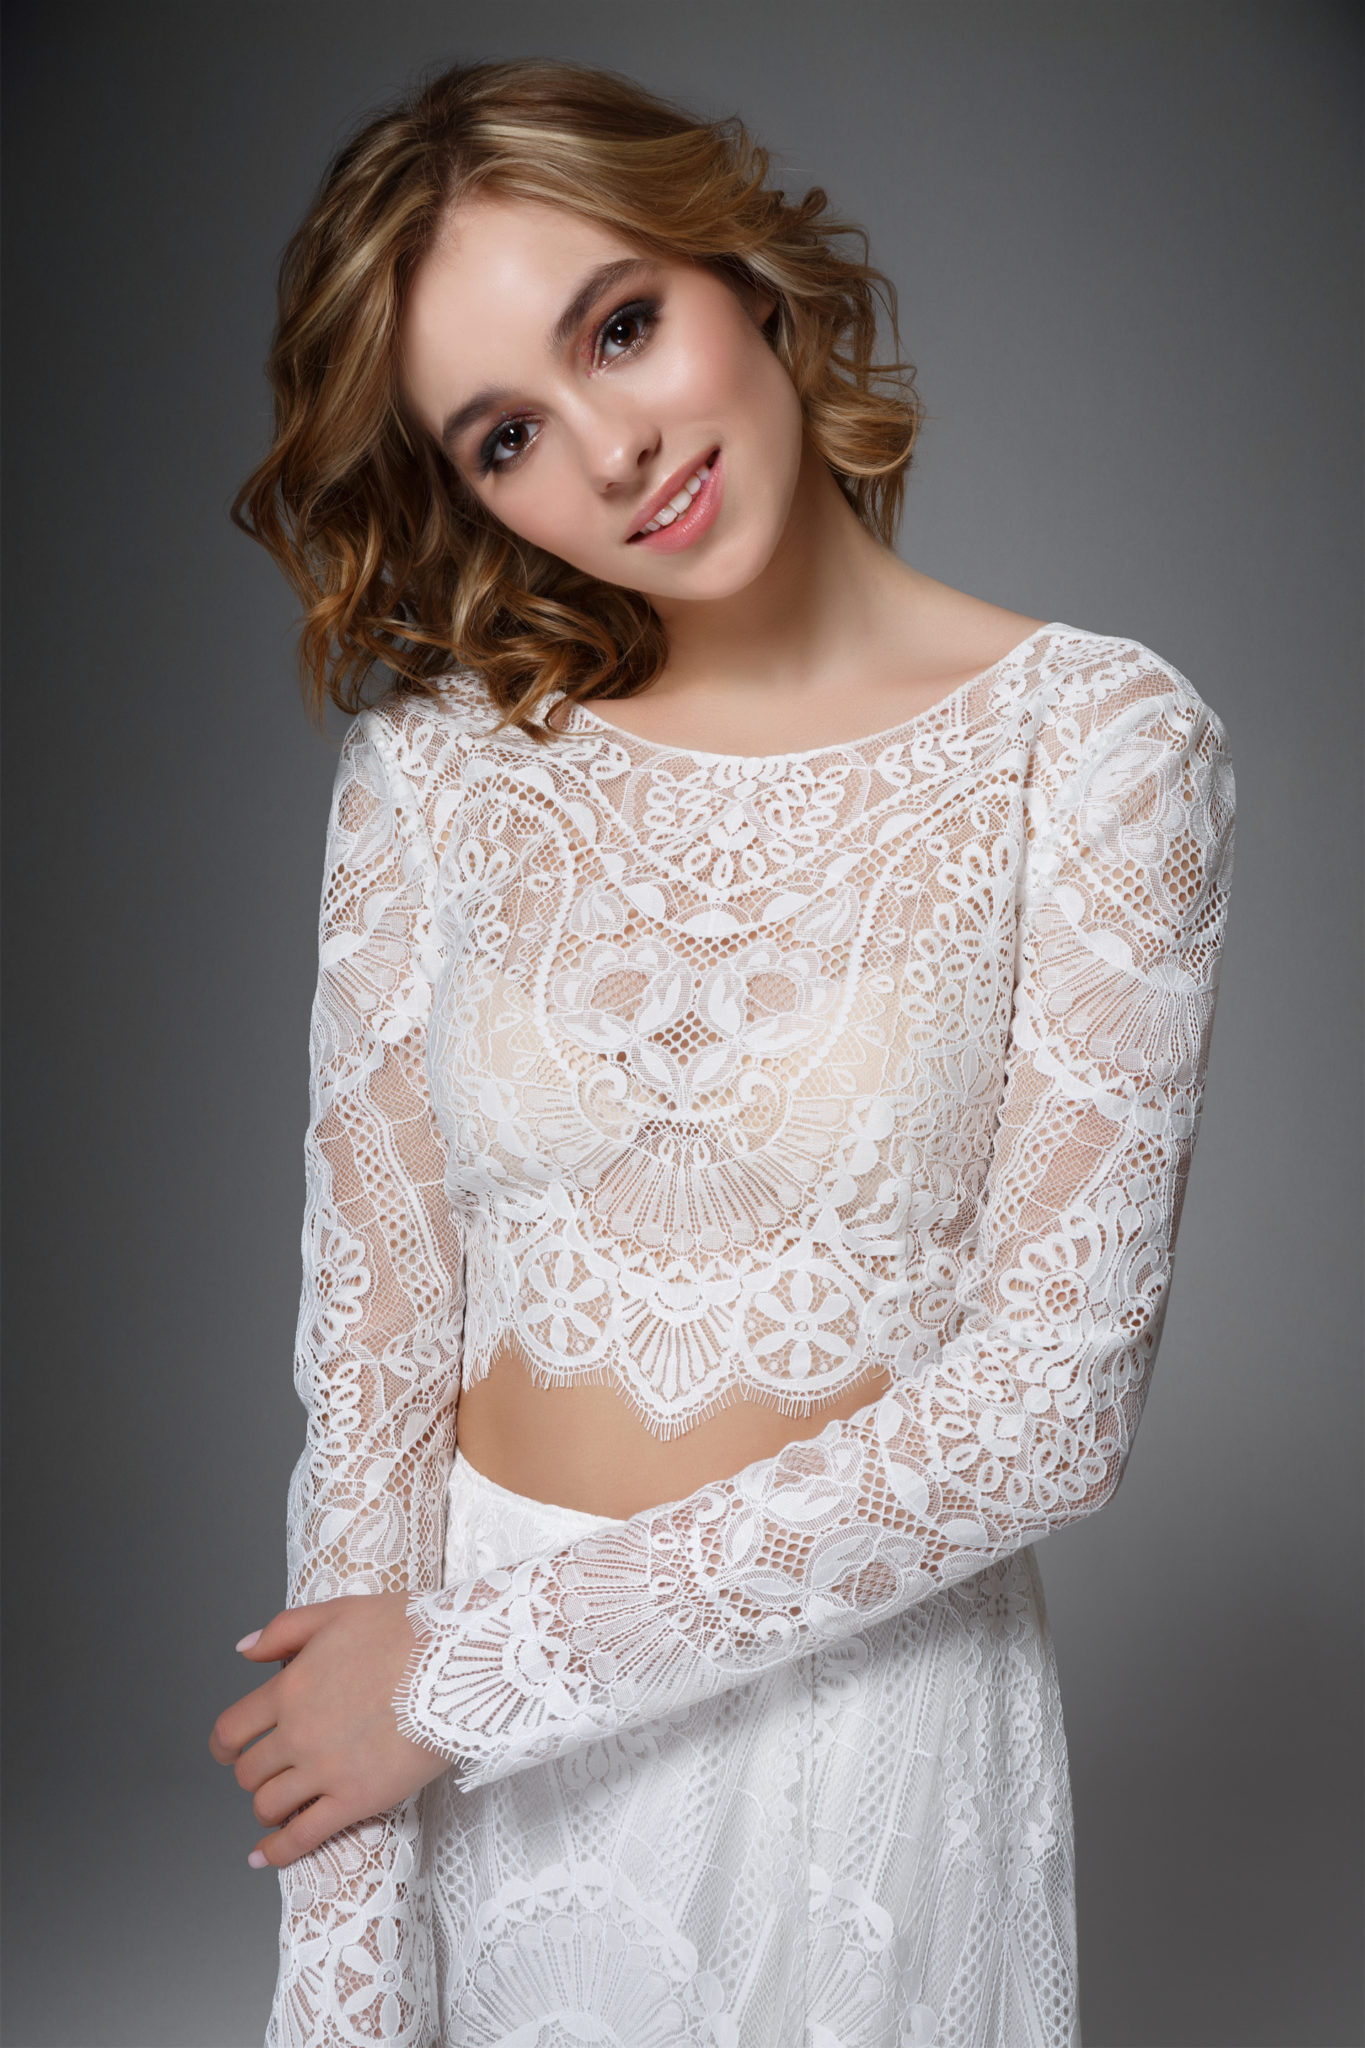 Lace Crop Tops, White Lace Crop Tops